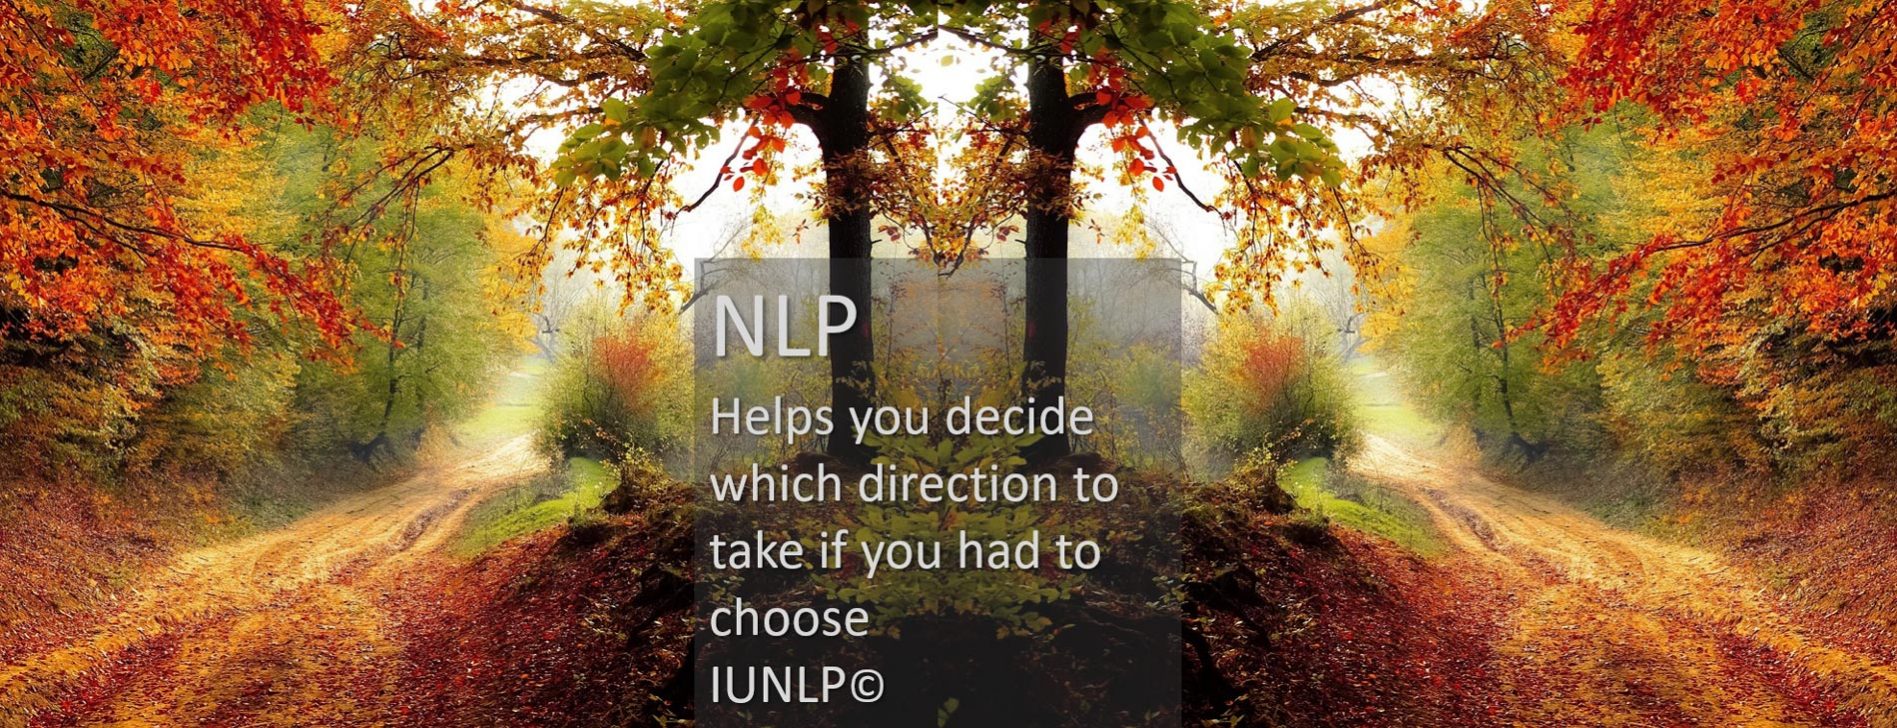 NLP training, NLP practitioner certification from the UK, The new generation of NLP